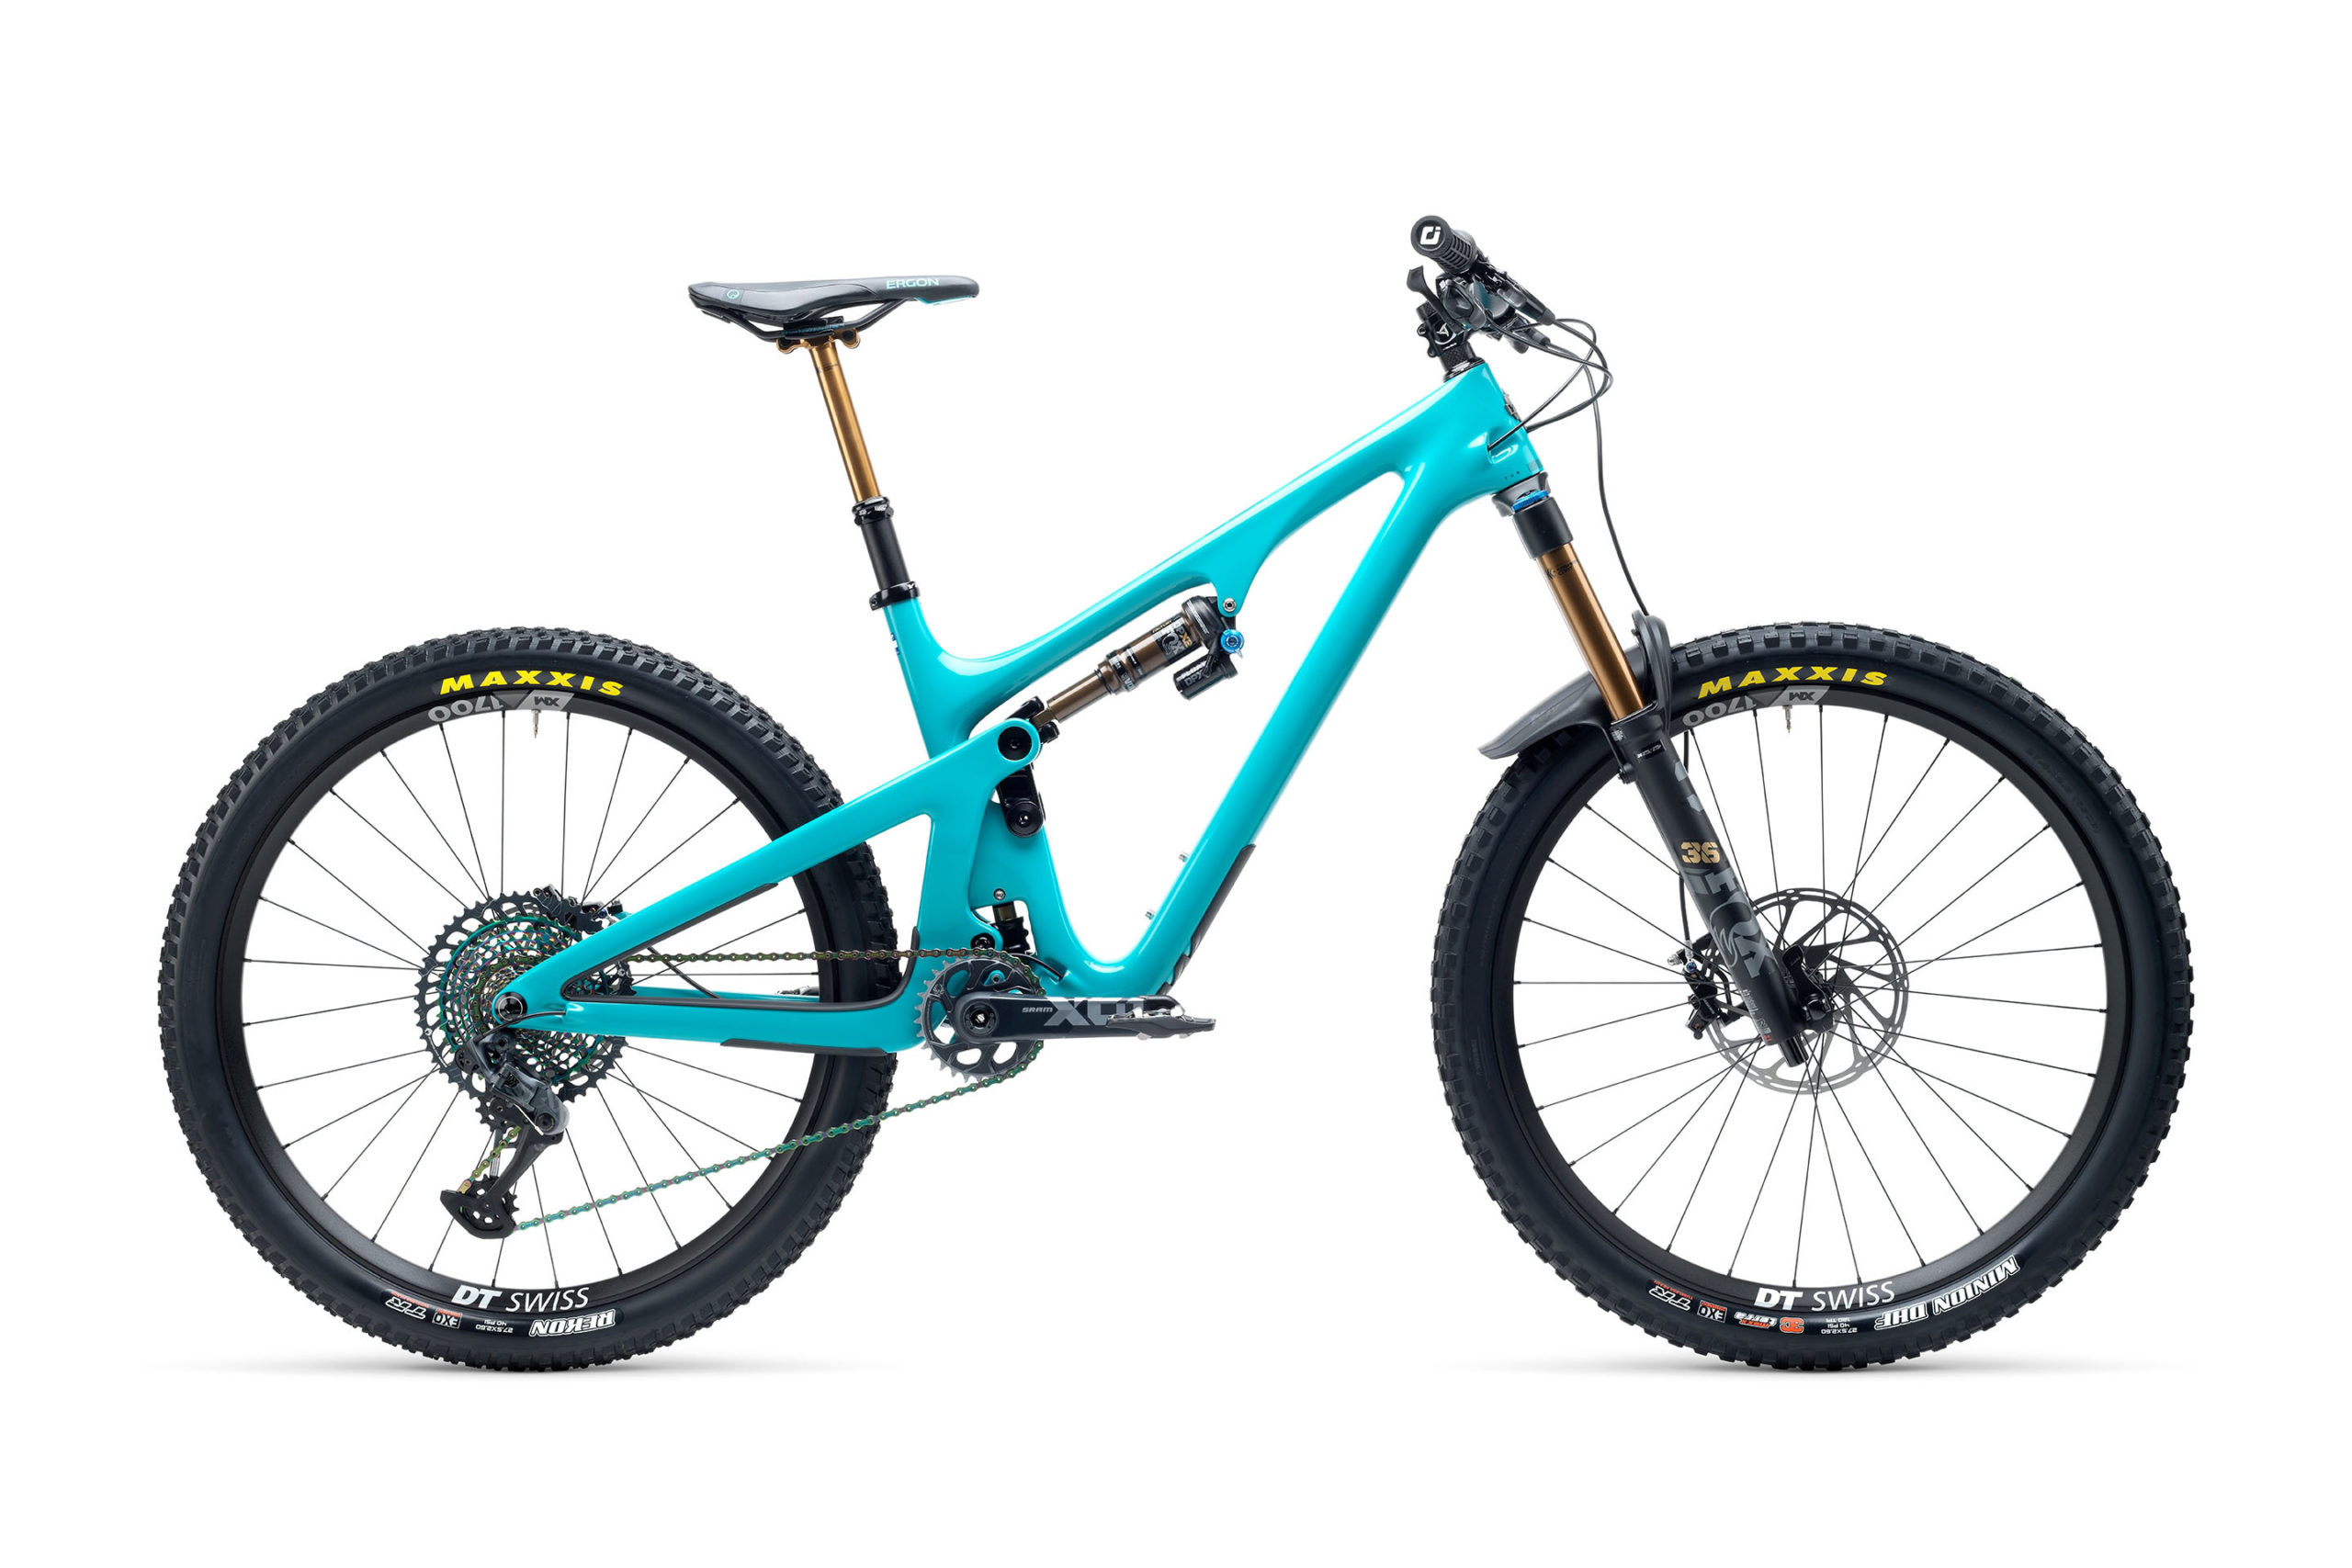 2021 Yeti SB140 in Turquoise color